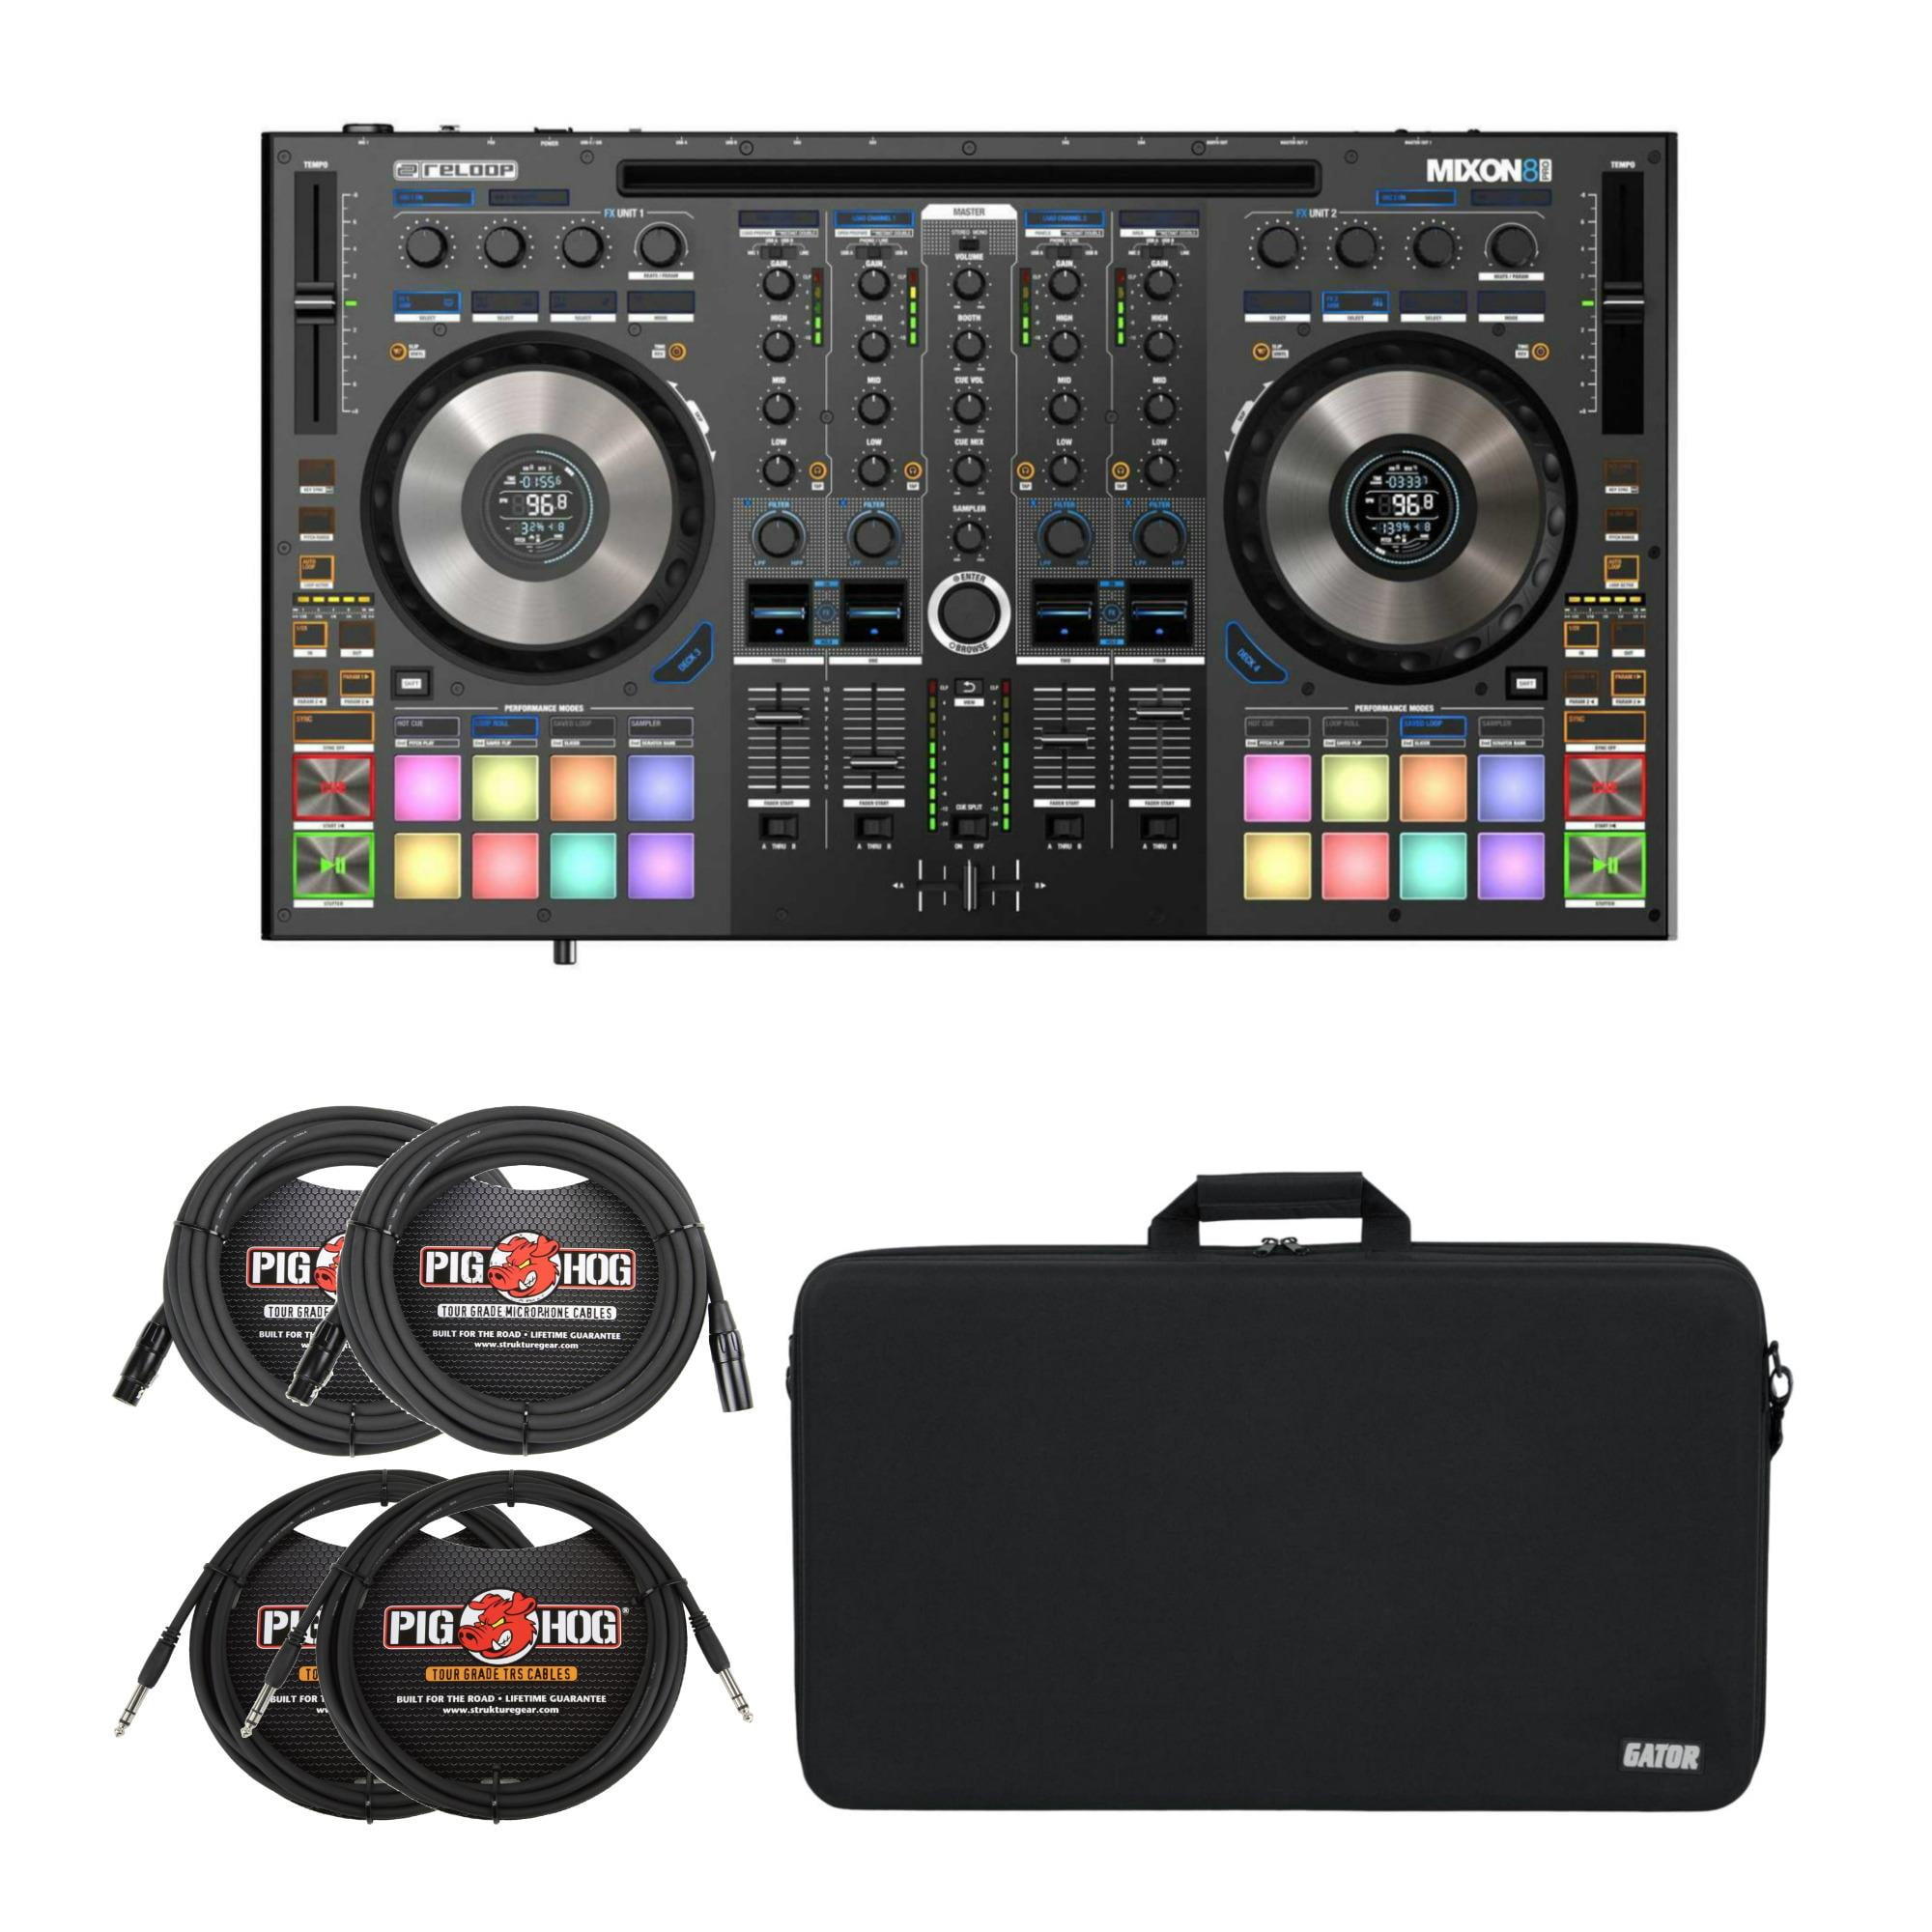 Reloop Mixon 8 Pro 4-channel DJ Controller with Case, XLR Cables